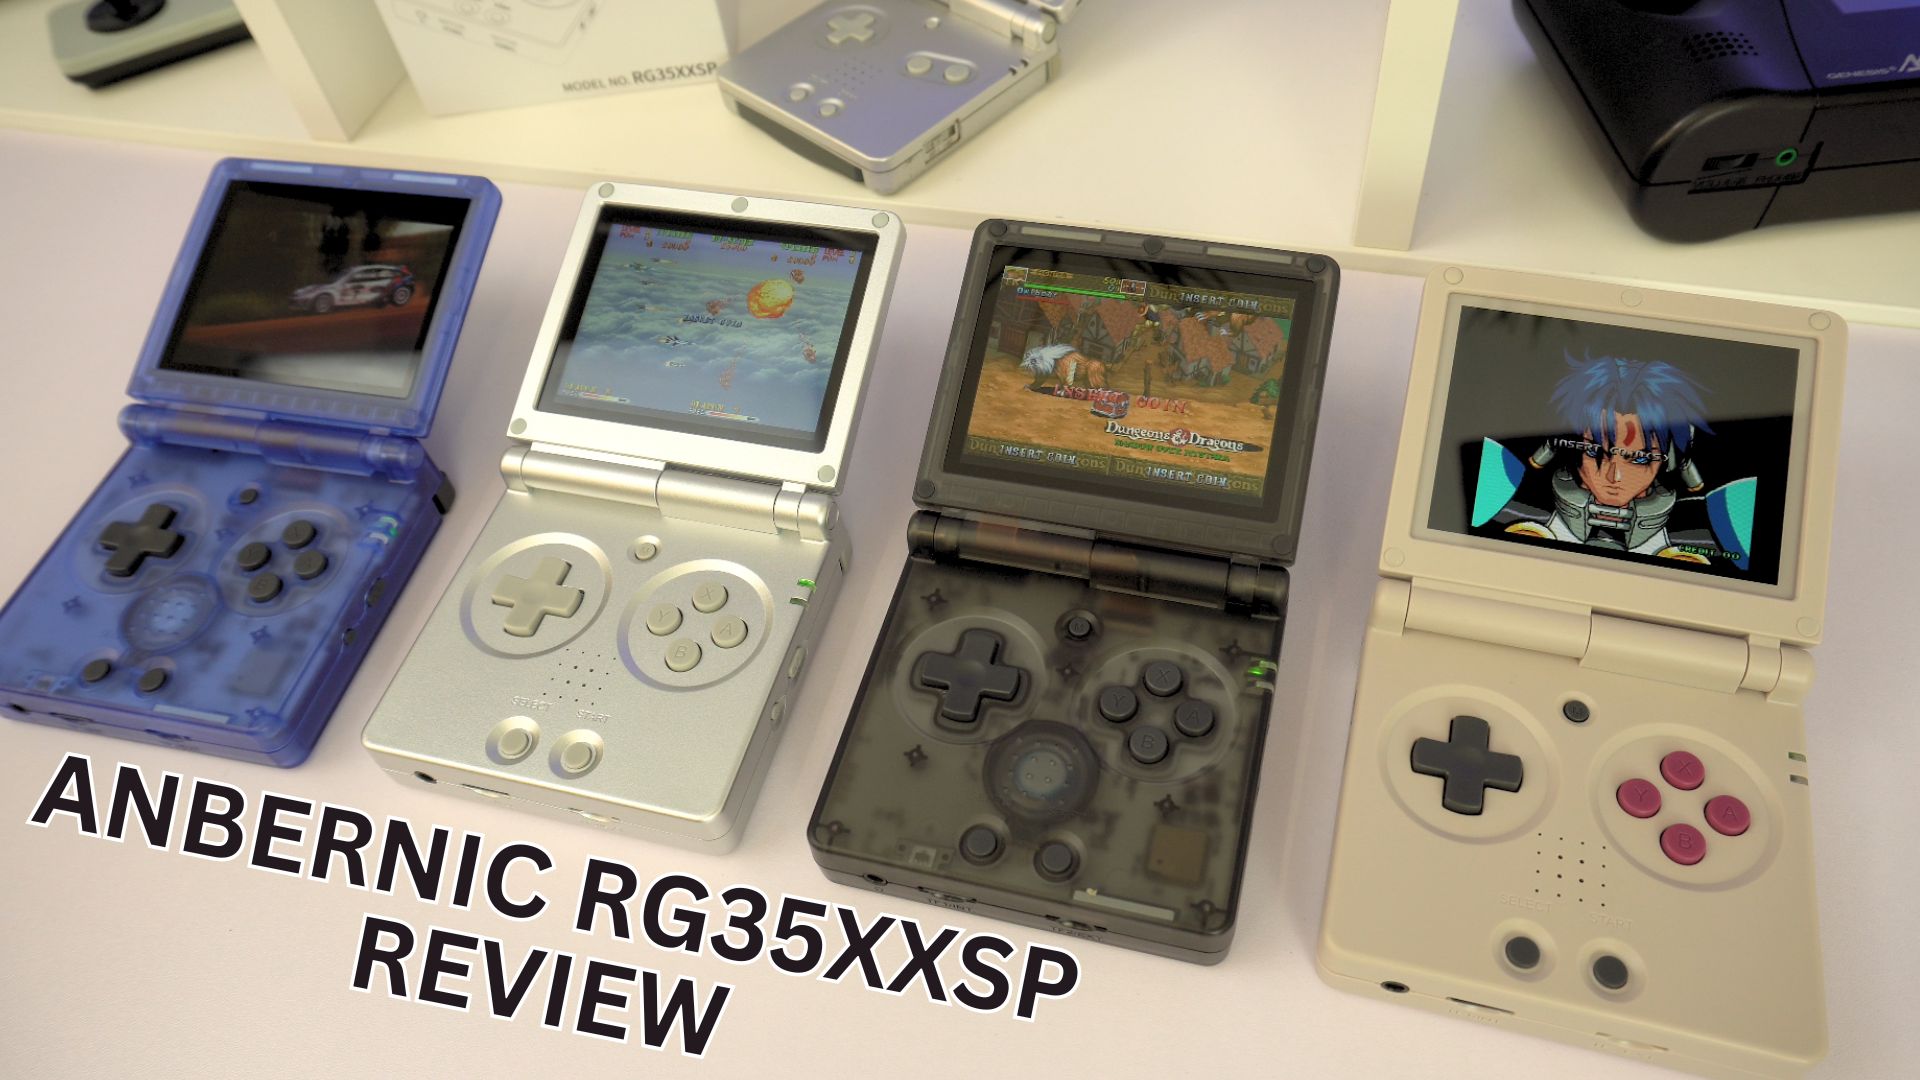 Anbernic RG35XXSP review – A great clamshell retro gaming handheld